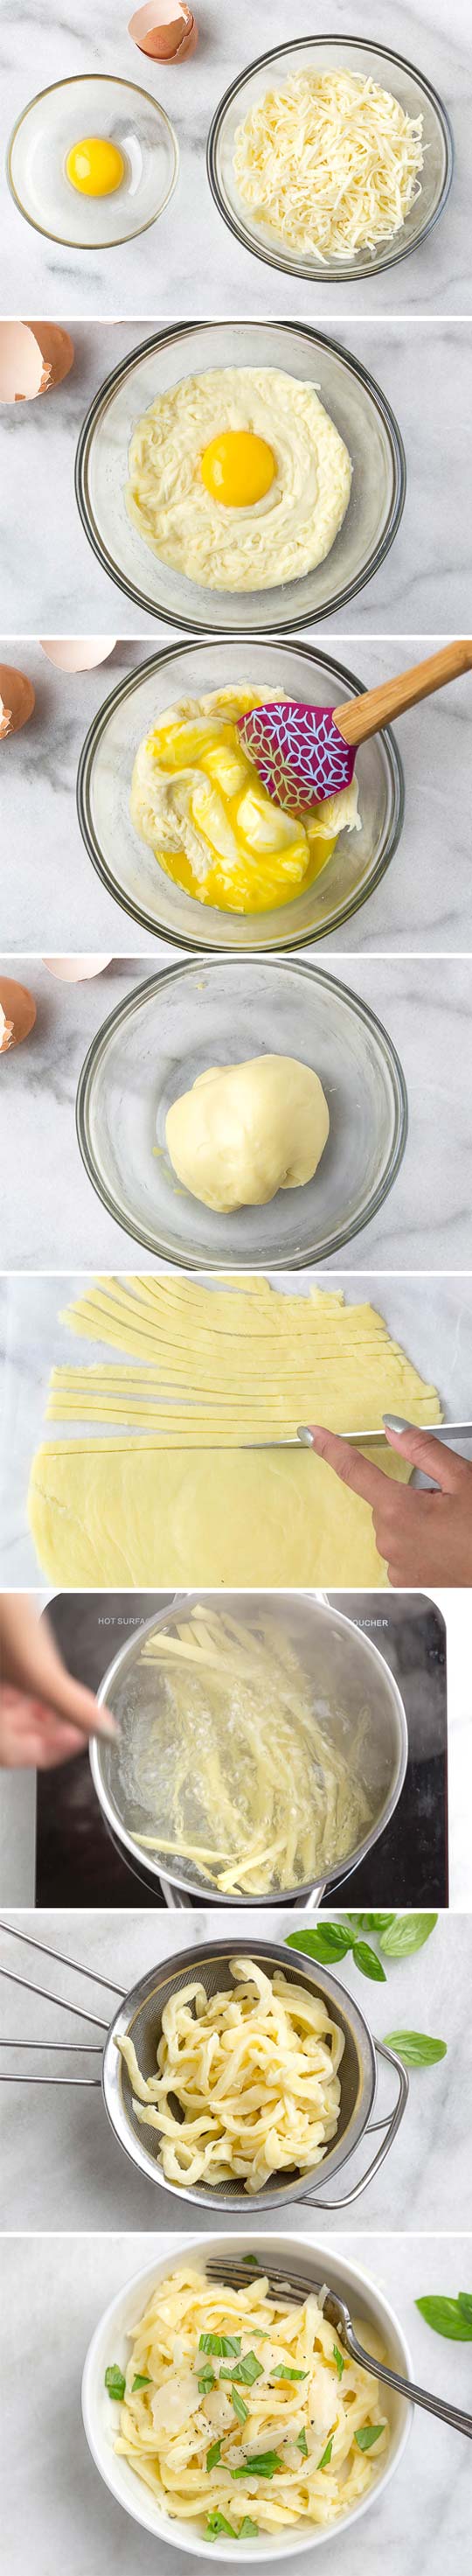 2-Ingredient Keto / Low Carb Pasta Noodles - #eatwell101 #recipe #keto #lowcarb #pasta - Chewy and delicious - the perfect low carb basis for all of your favorite pasta sauces and flavors!